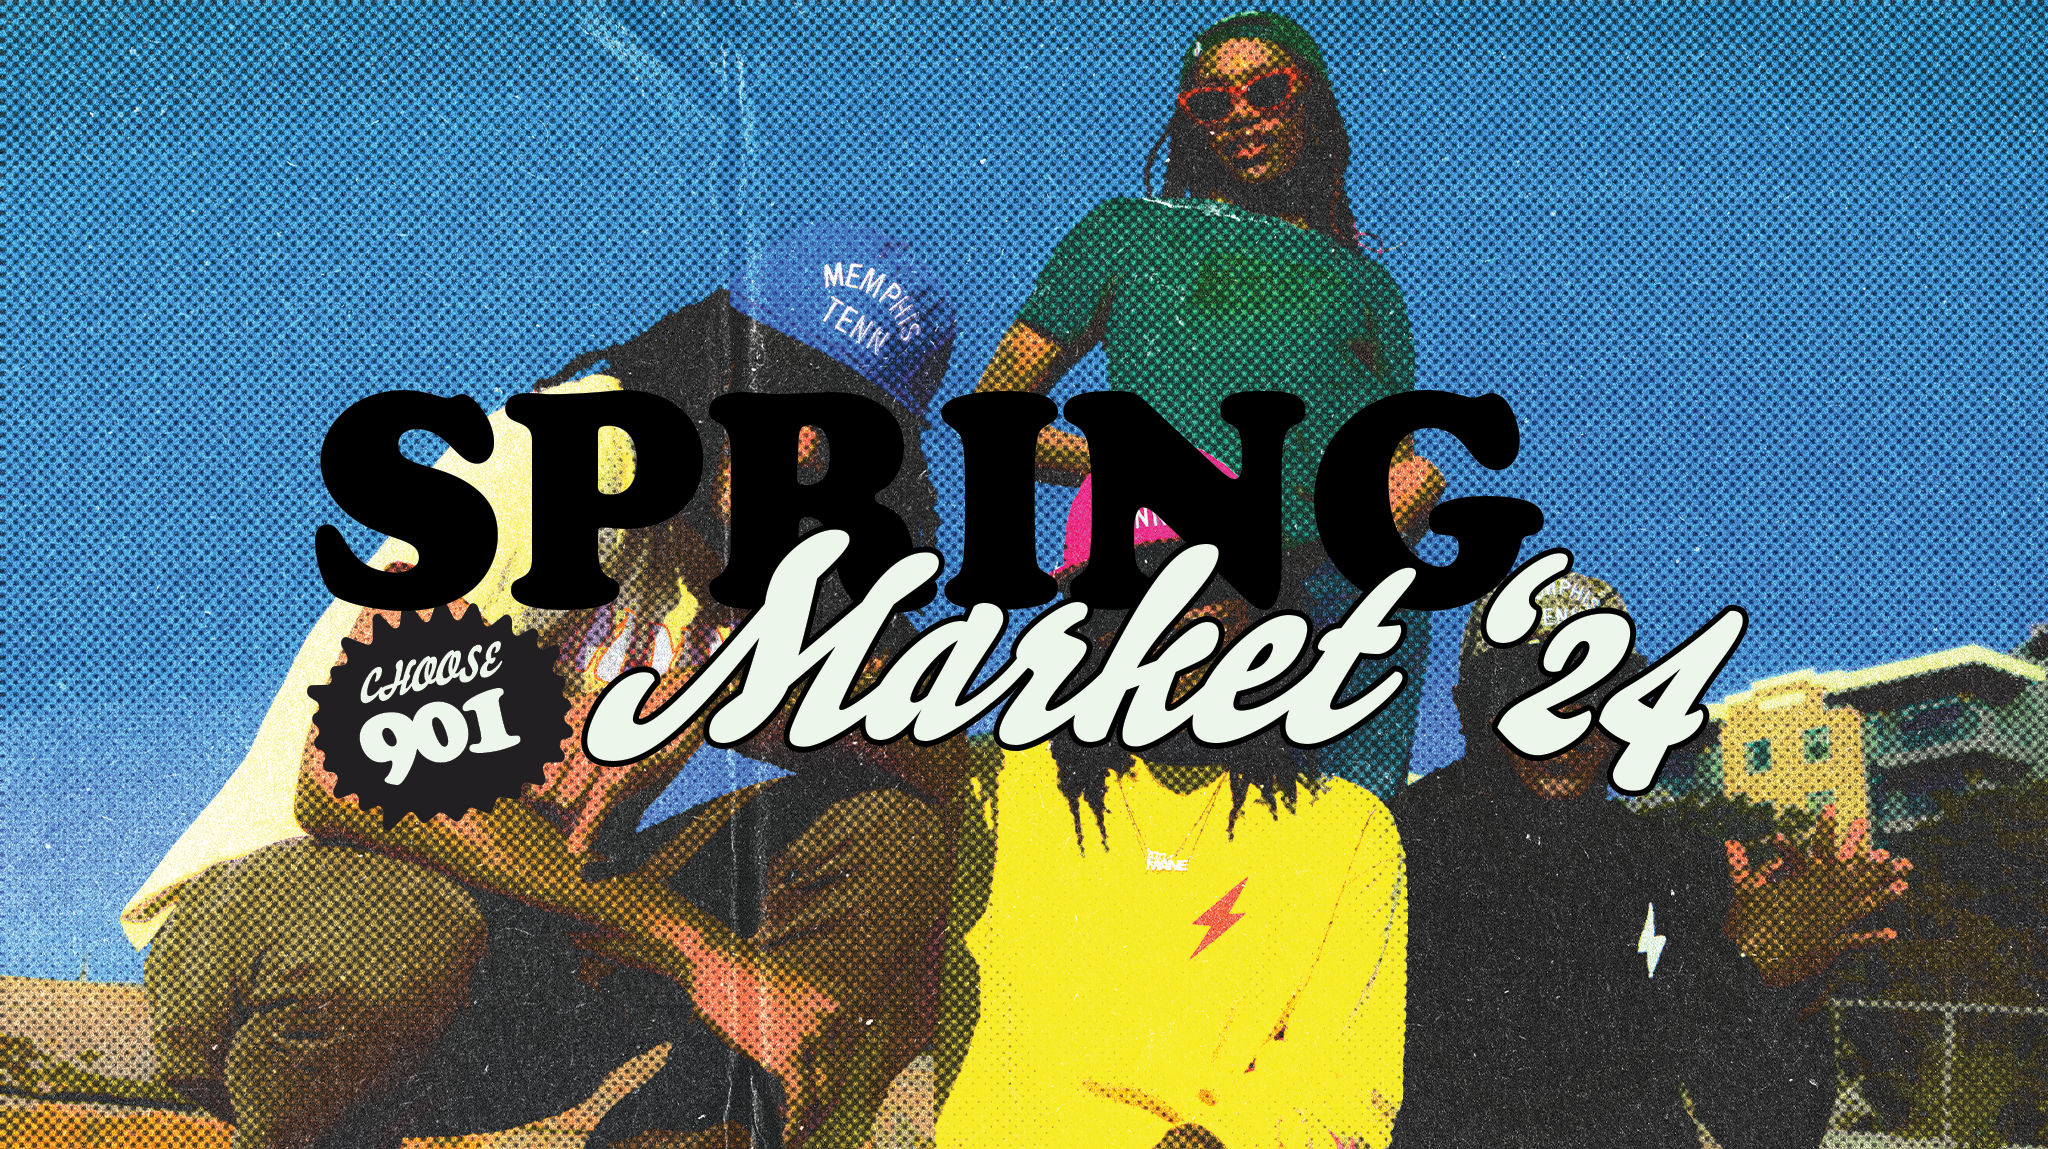 Promotional graphic for "Choose901 Spring Market '24" featuring stylized text overlaying an image of two people with a vintage filter.